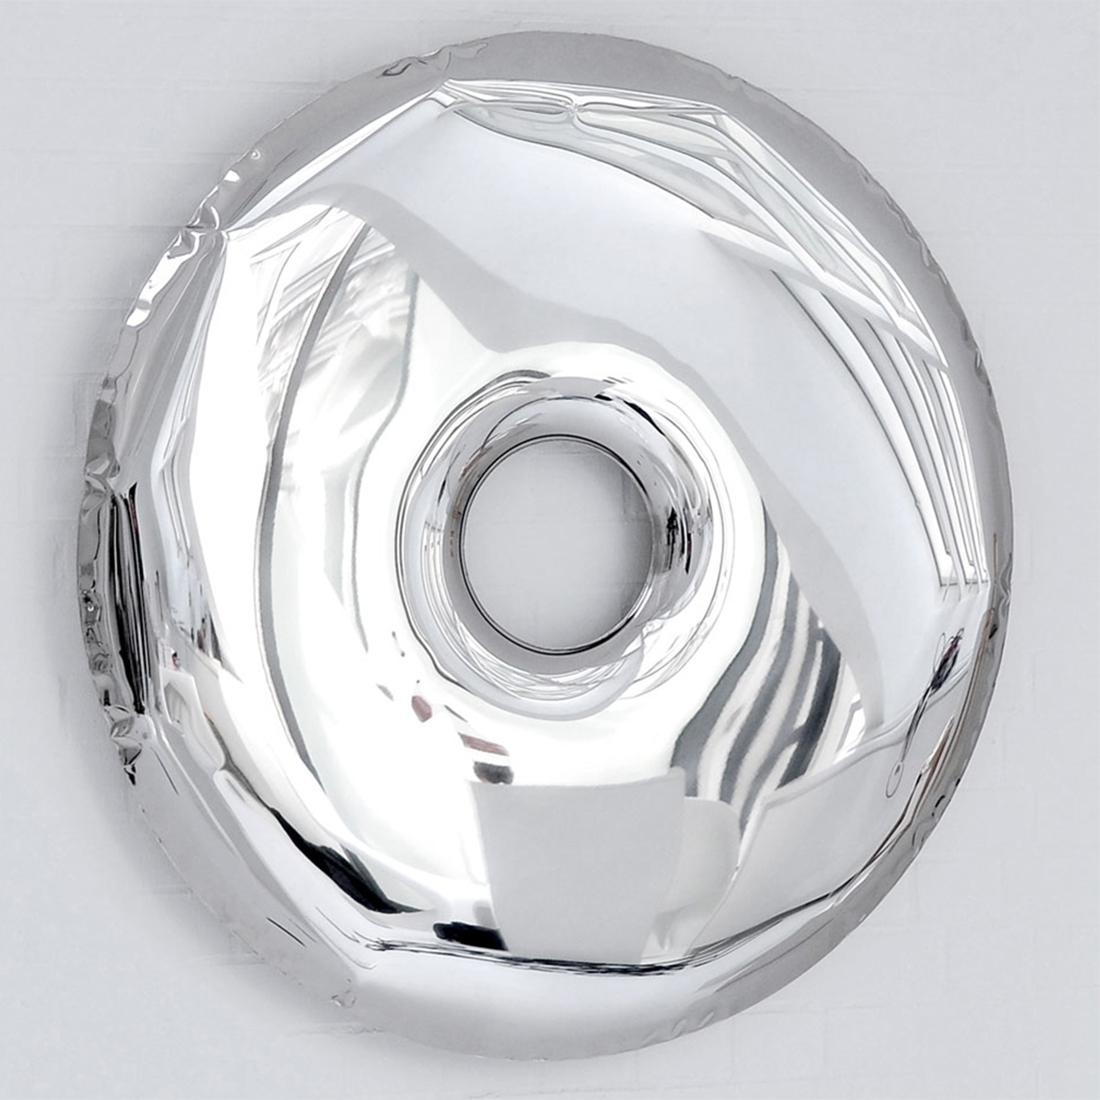 Mirror target 120 made in polished stainless steel,
using bending properties of steel sheets.